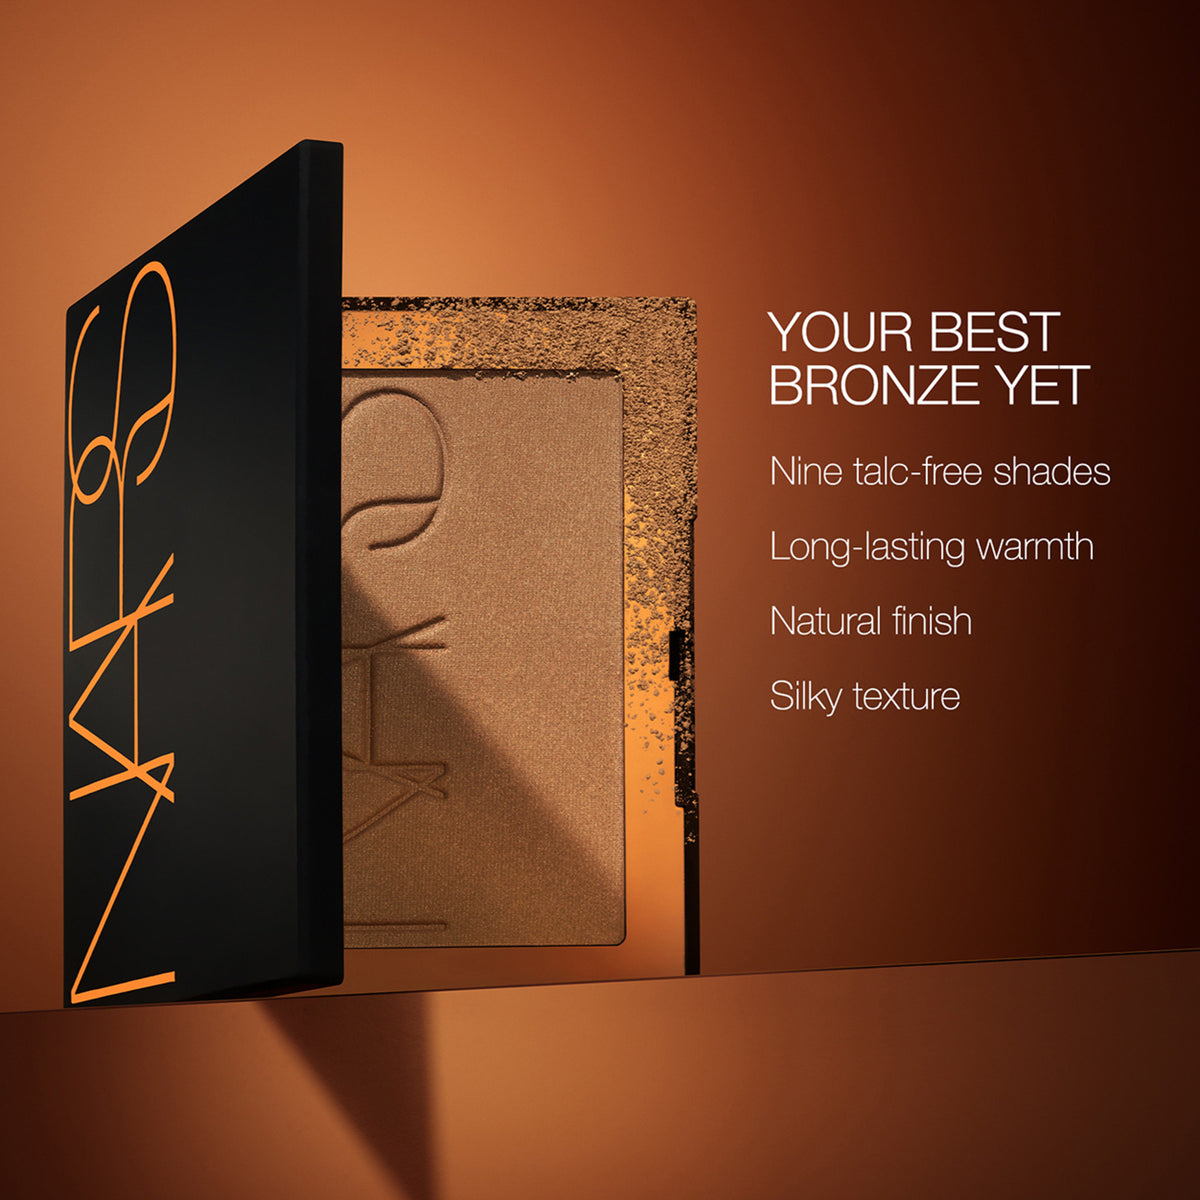 Nars Laguna Bronzing Powder . This product is for deep complexions